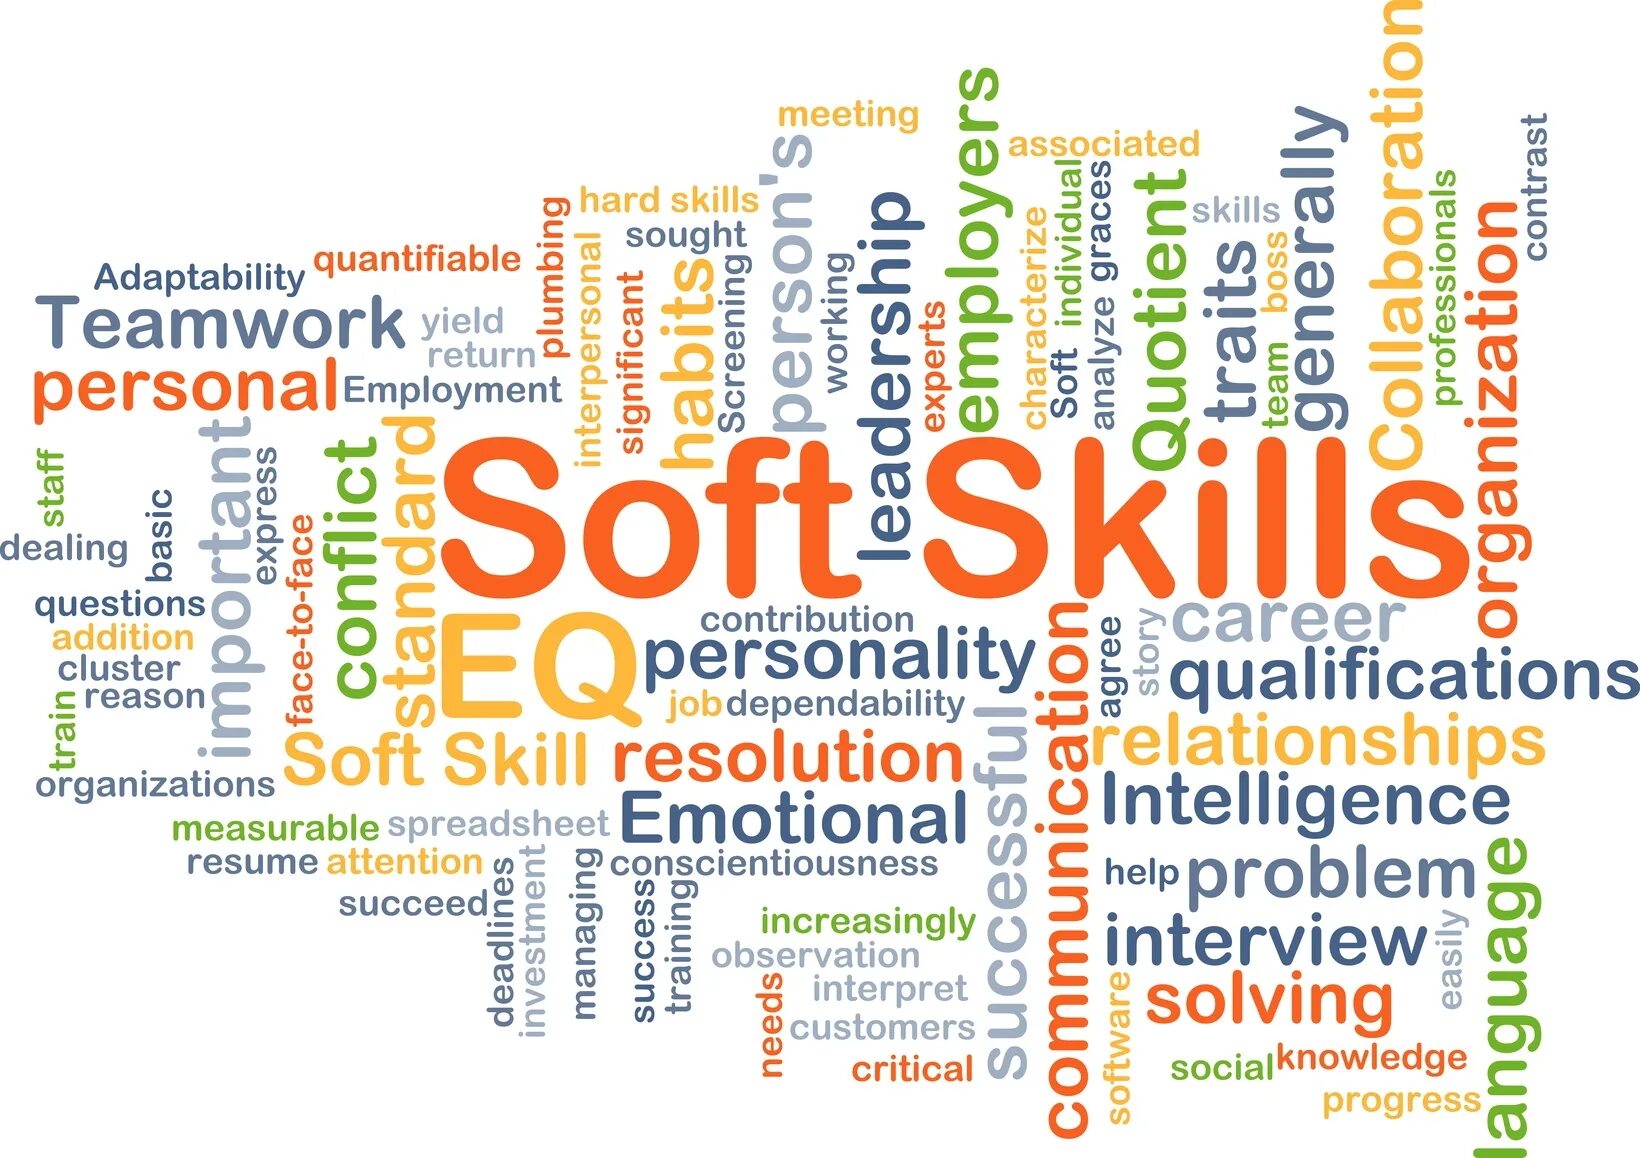 Help and attention. Софт Скиллс. Мягкие навыки Soft skills. Гибкие навыки Soft skills. - Формирование Soft-skills-навыков.